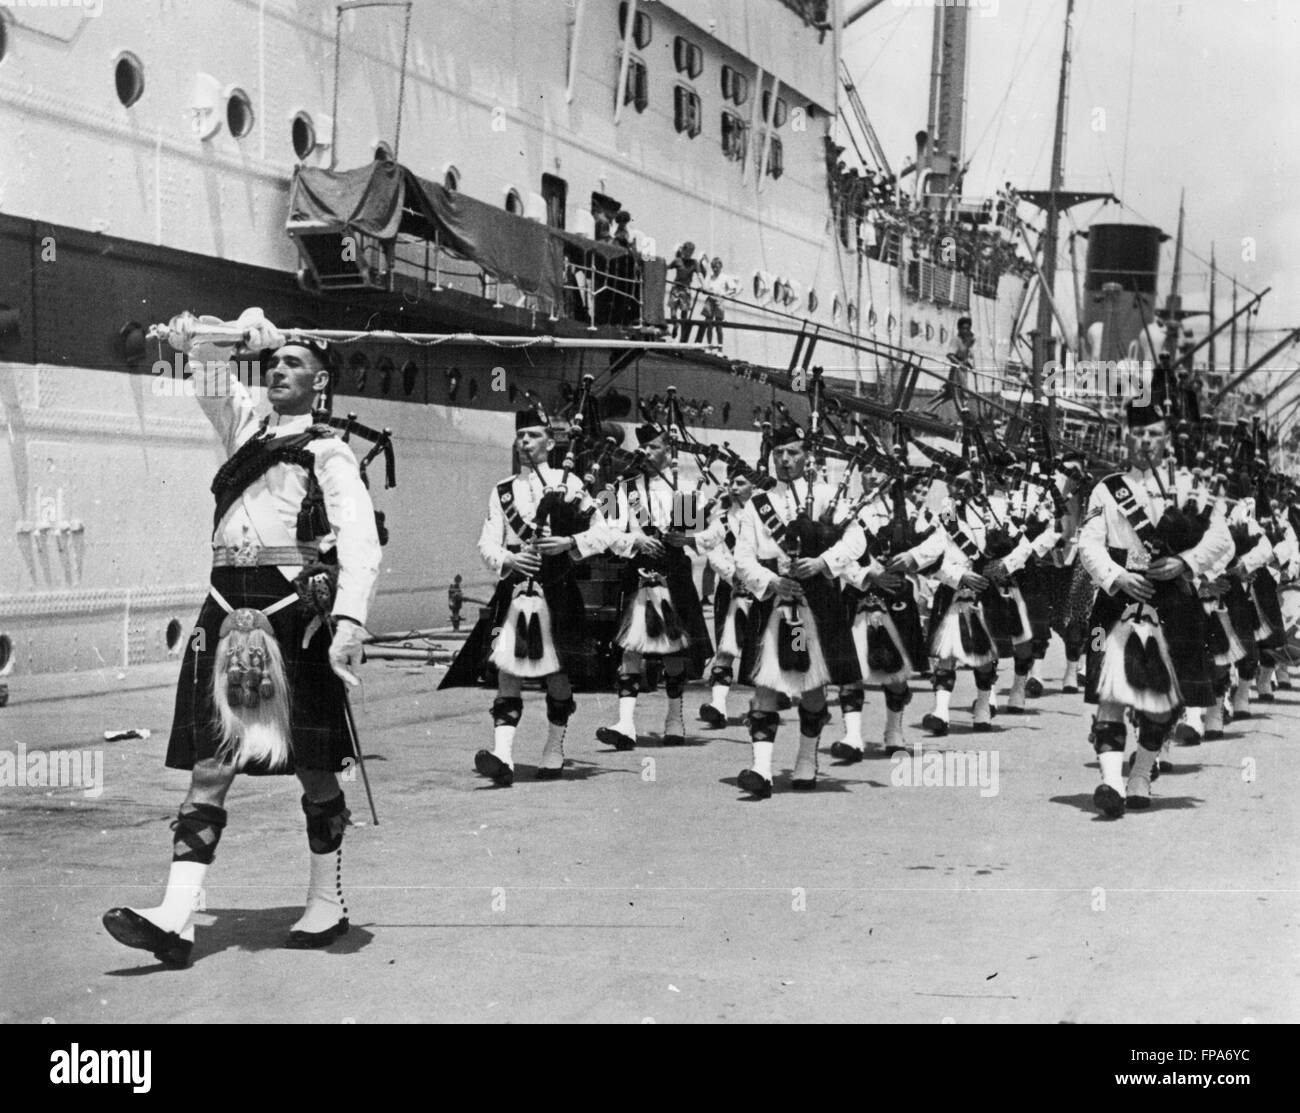 1962 - Malaya vets will Parade for the Queen: After nearly three years of Jungle fighting in Malaya, the 1st Battalion, the Cameroonians, have left for Scotland where they will perform ceremonial duties during the Queen's visit, June 23-29. The British-led battle against Communism in Malaya, which involves a total force of nearly 300,000 men and so far has cost the equivalent of 24 million, is now entering its sixth year. Photo Shows The Cameroonians, sailing from Singapore, are given a send-off by pipers and drummers of the 1st Battalion Gordon Highlanders who traveled from Malaya for the occ Stock Photo